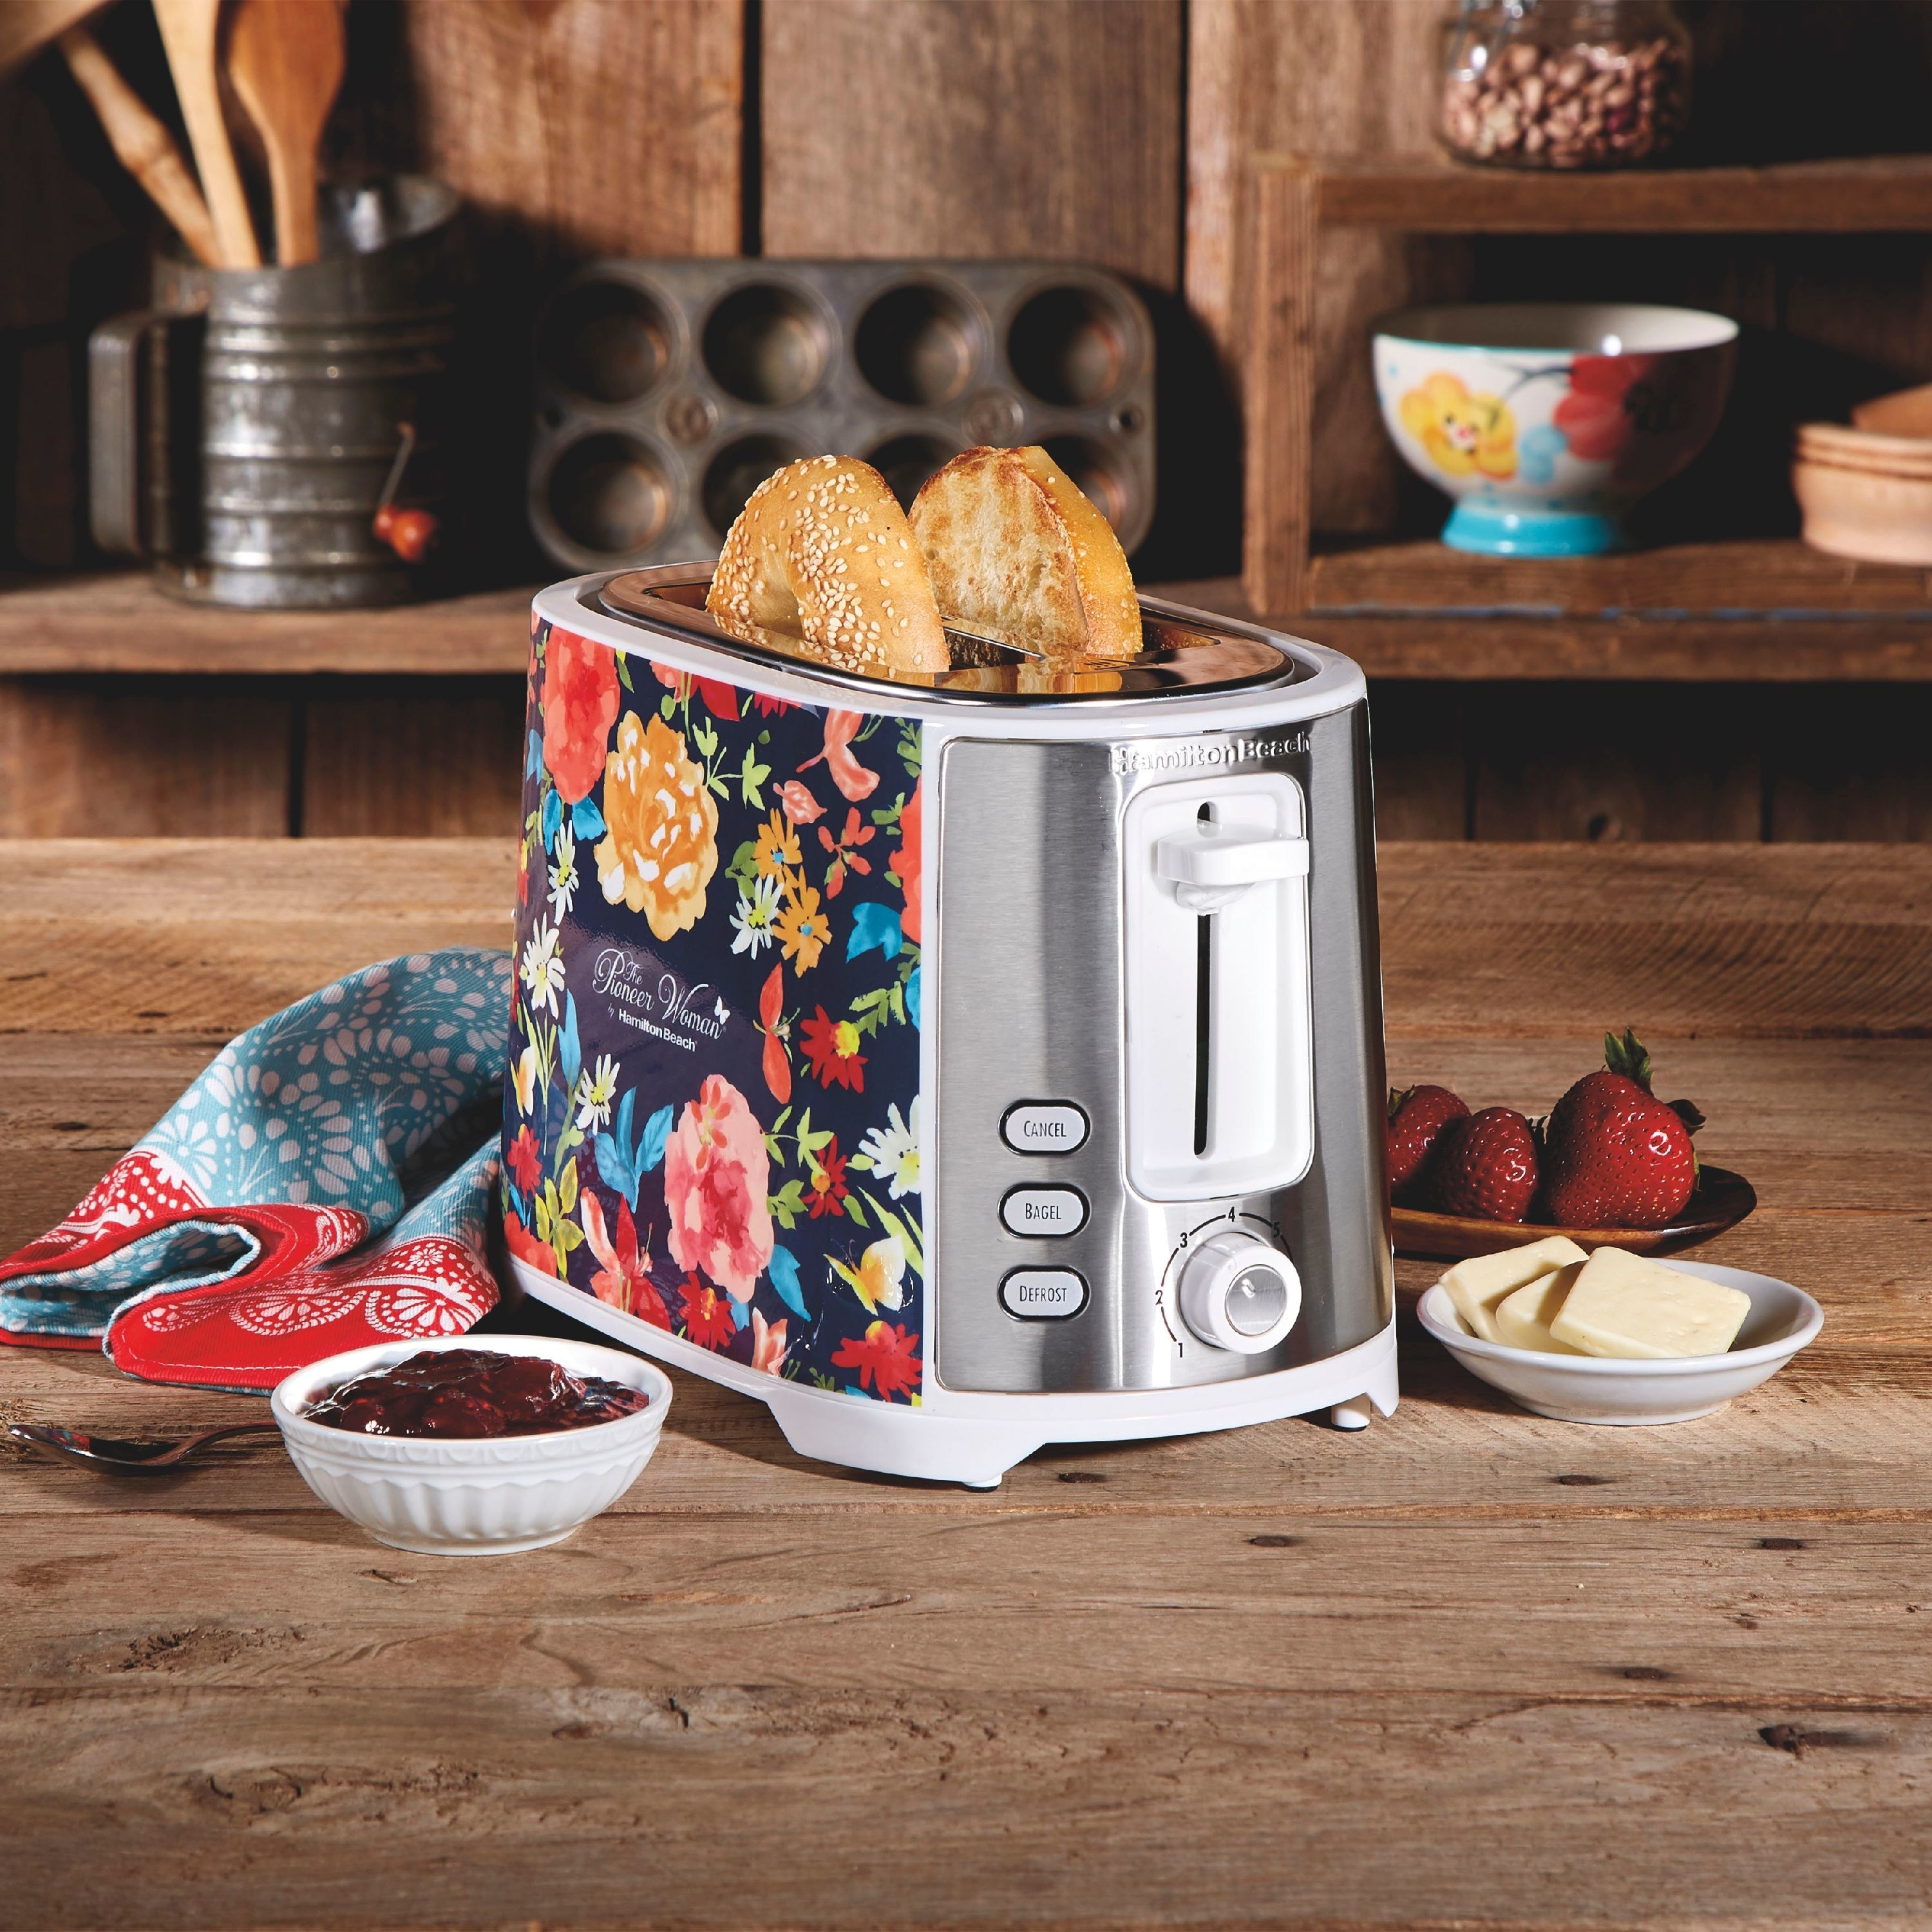 a navy blue toaster with a floral pattern on it and silver sides